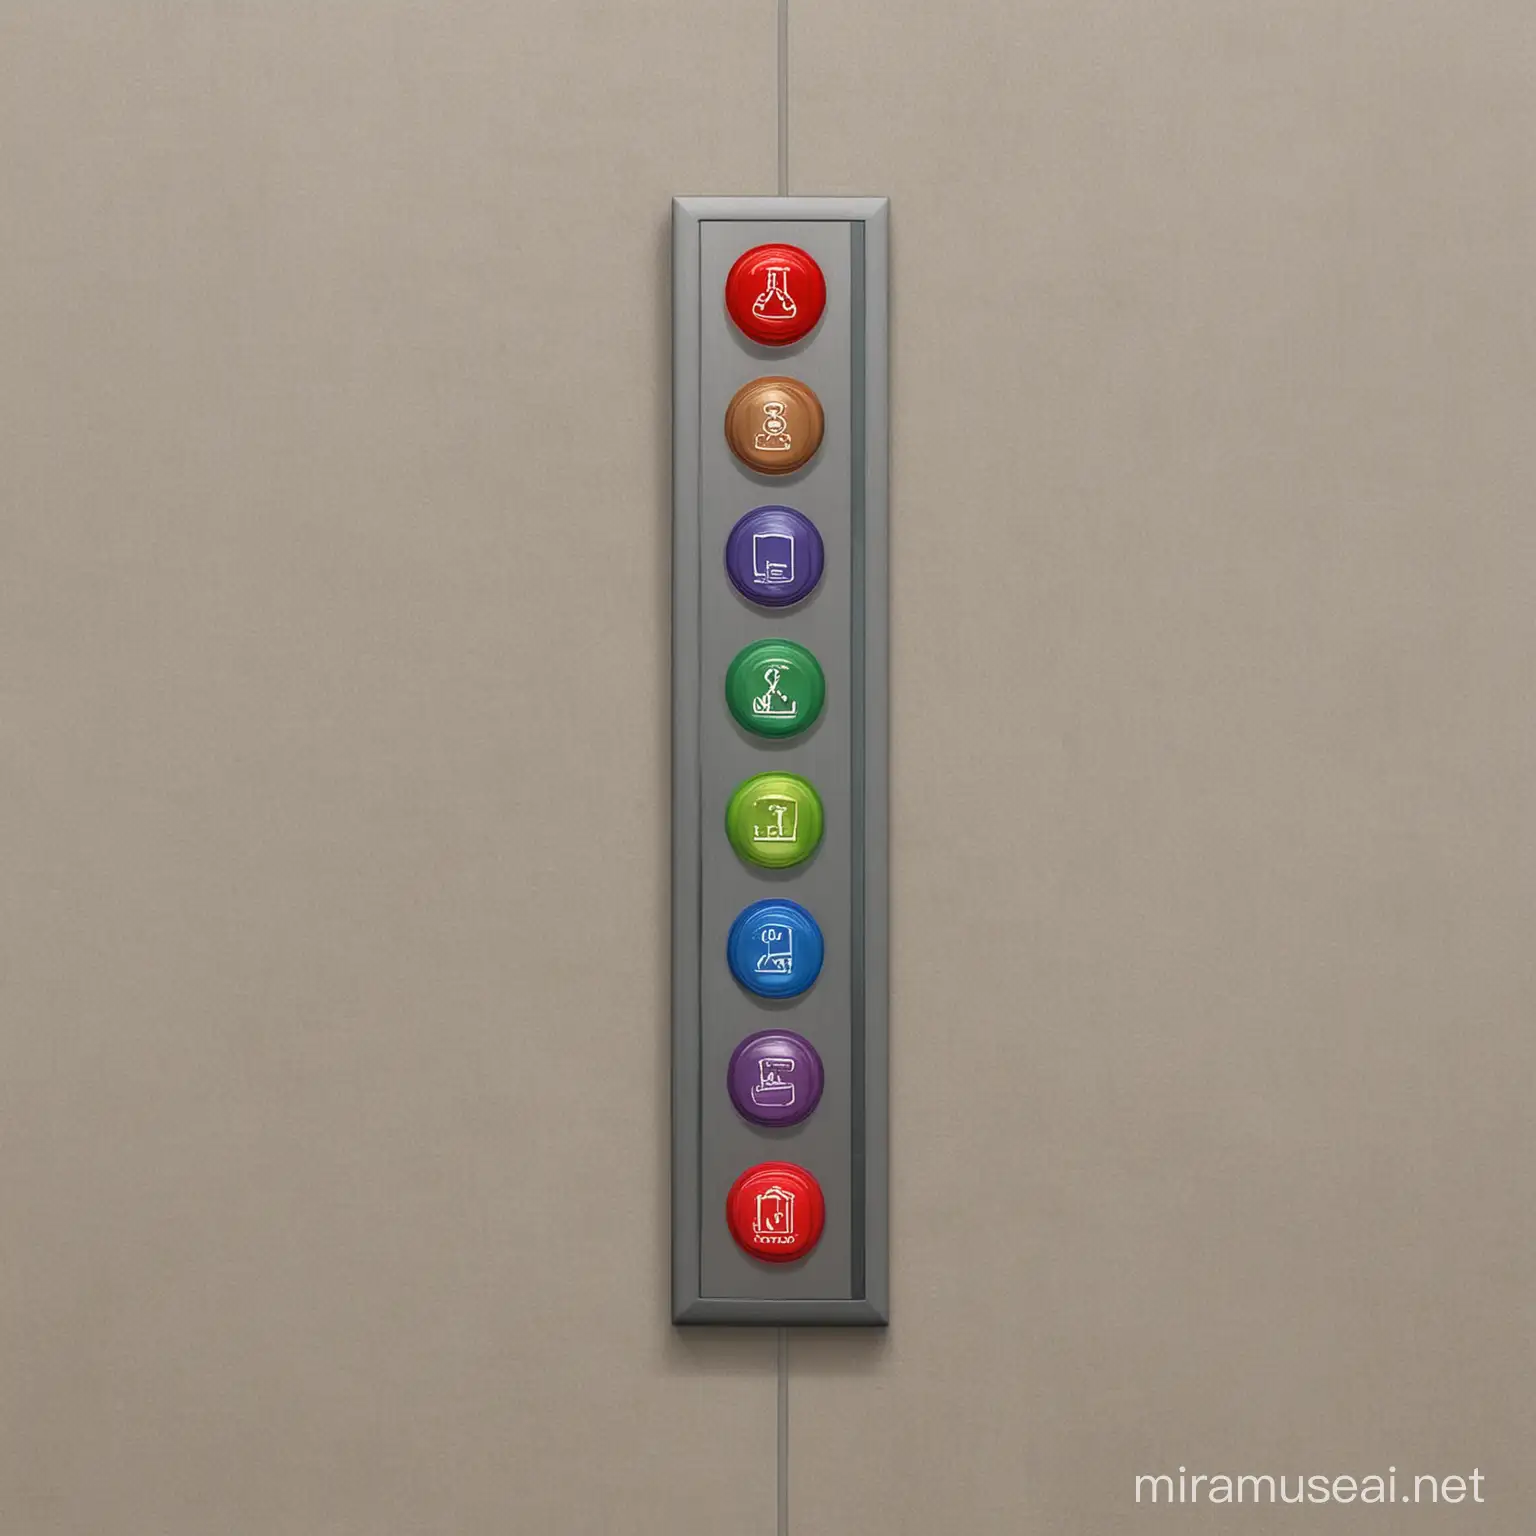 Interactive Elevator Button Chart for Easy Navigation